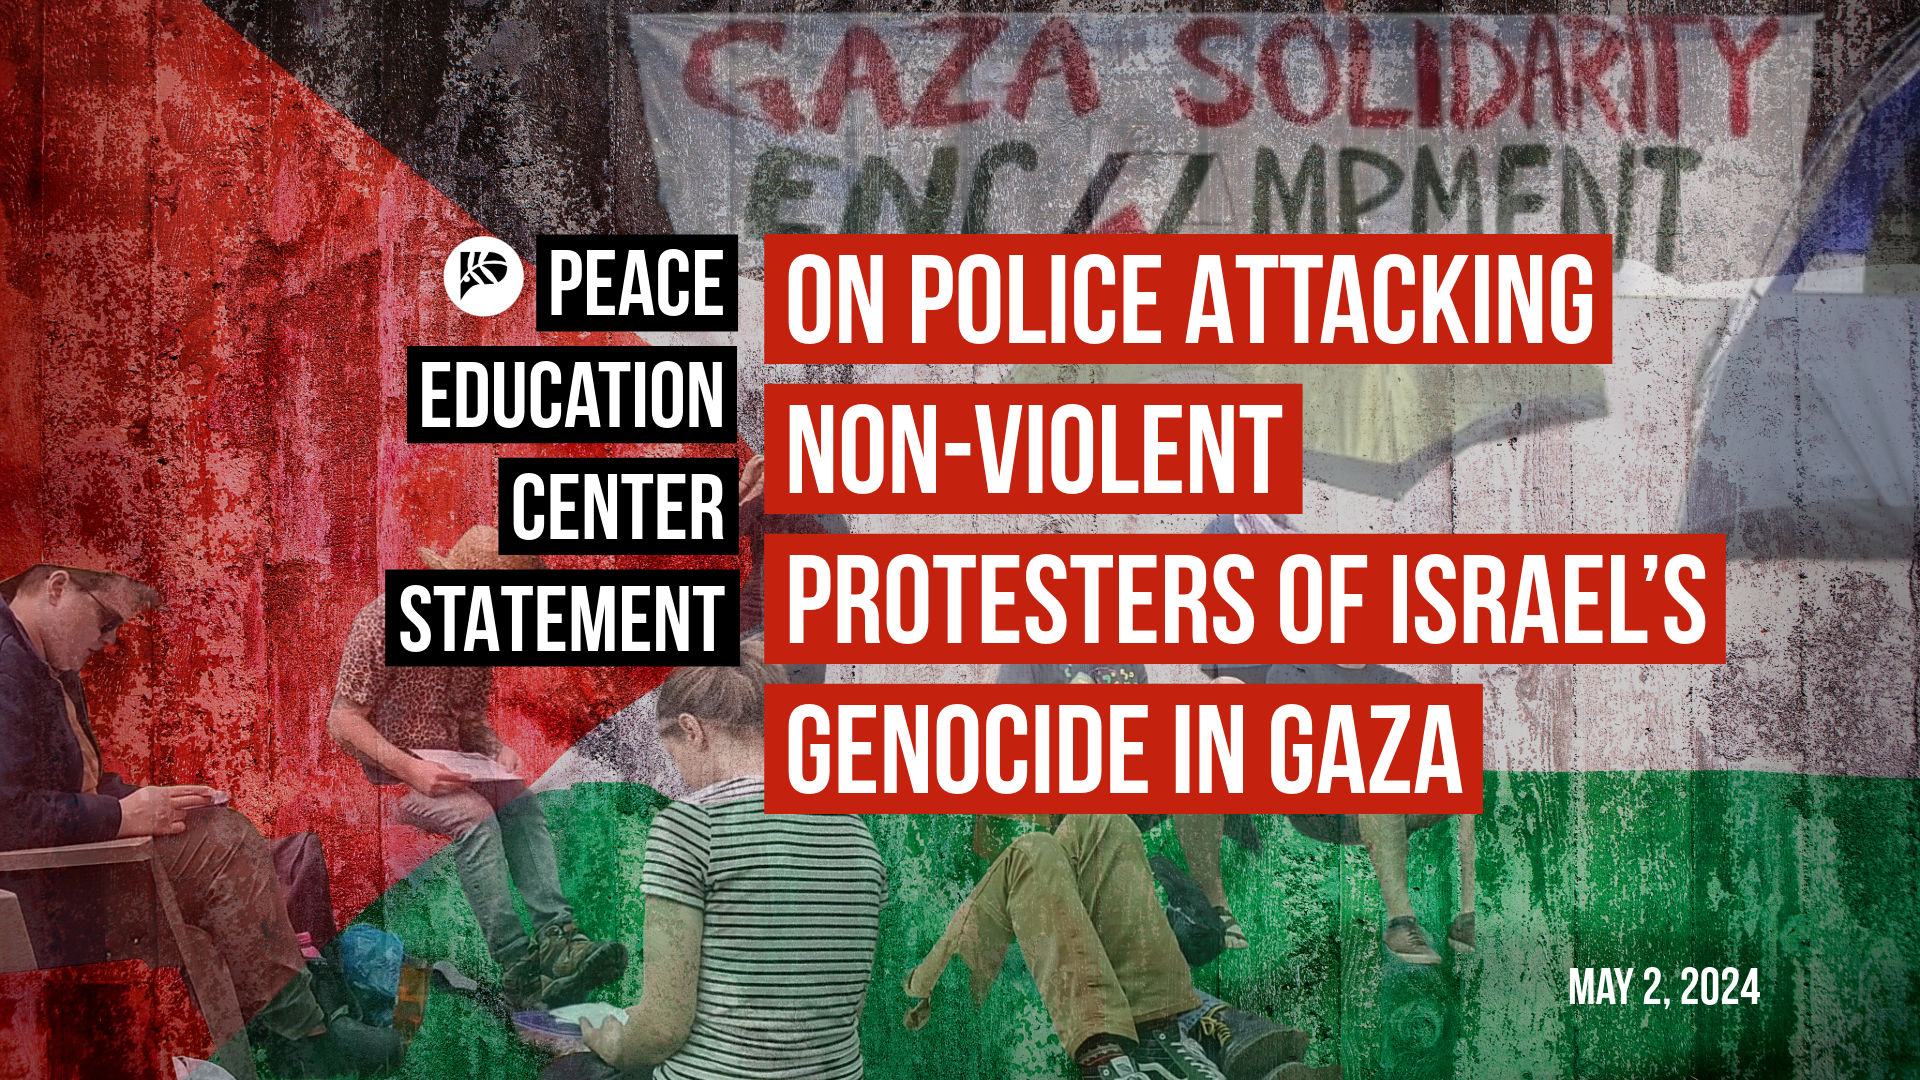 PEC’S Statement on police attacking non-violent protesters of Israel’s genocide in Gaza